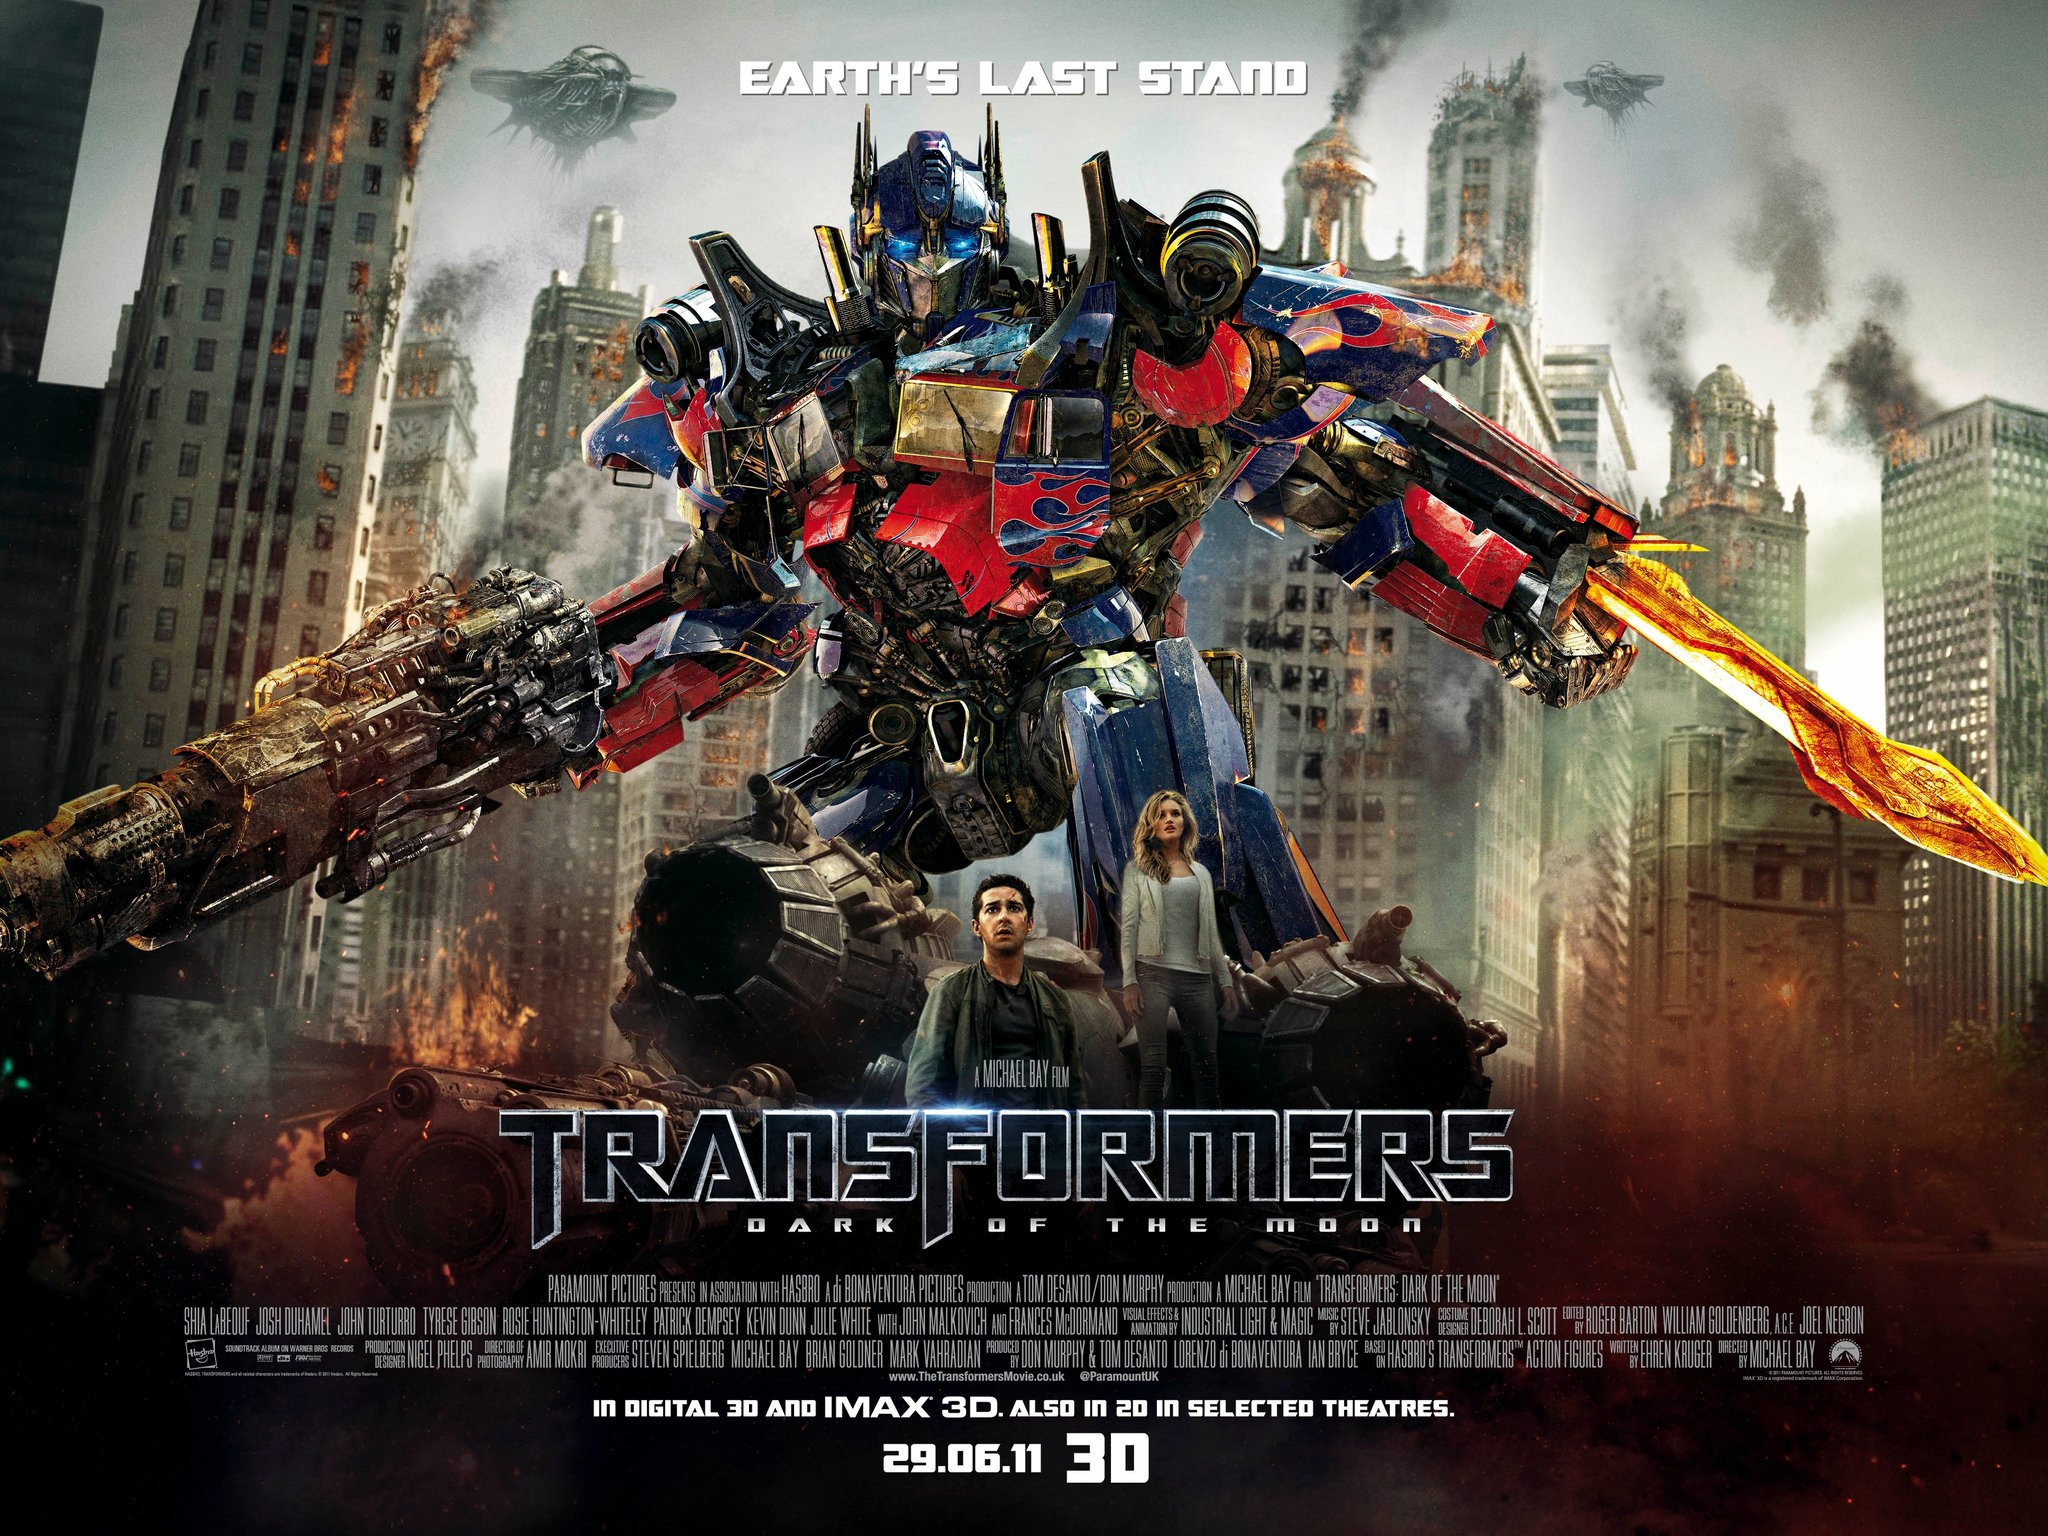 Transformers: Dark of the Moon for windows download free